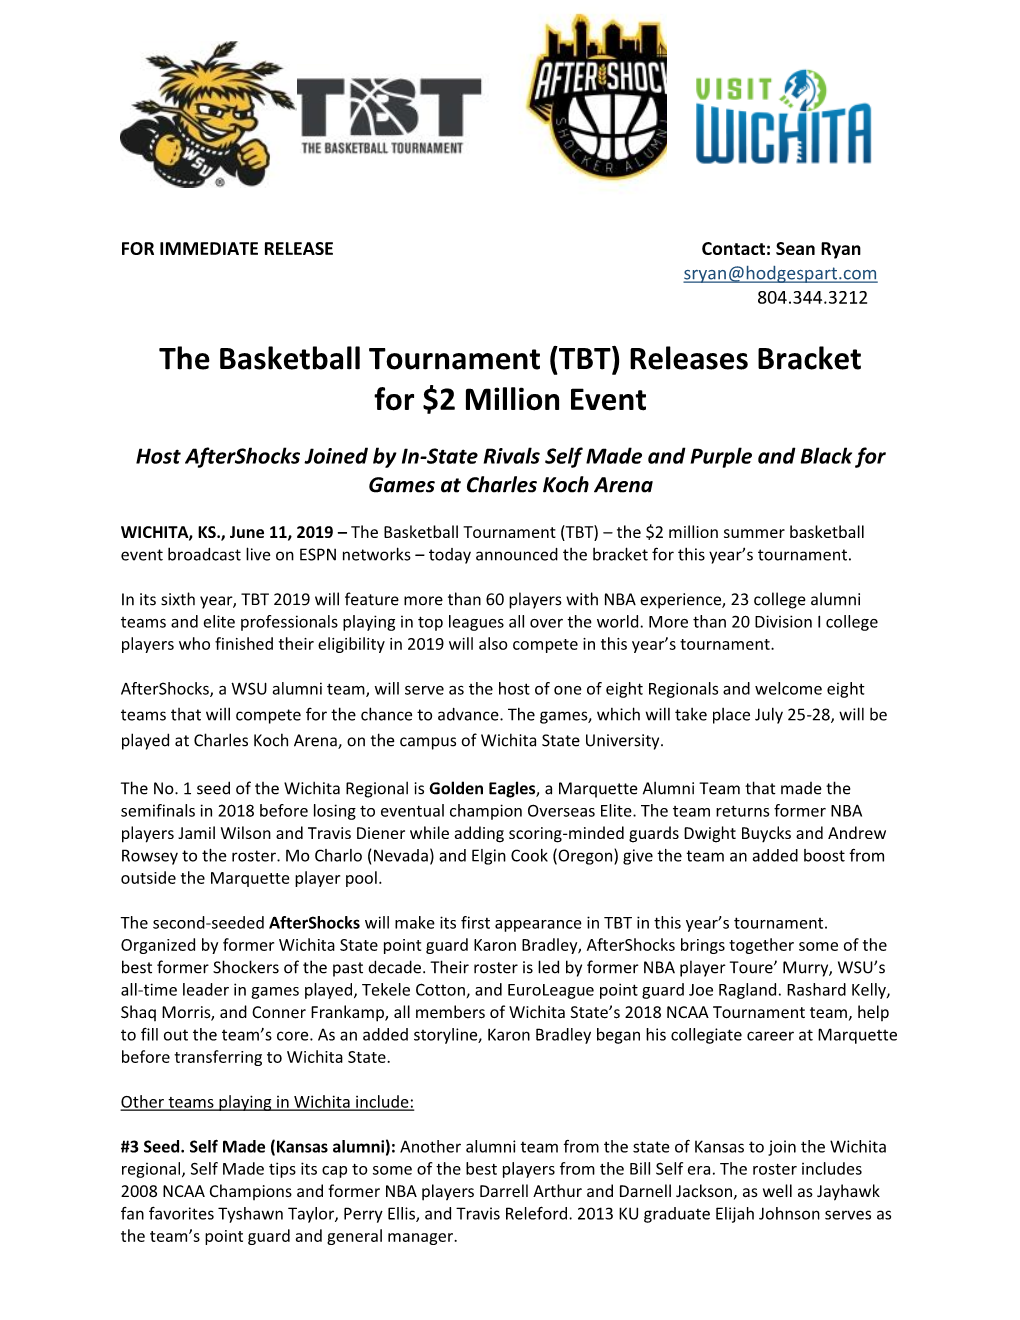 The Basketball Tournament (TBT) Releases Bracket for $2 Million Event